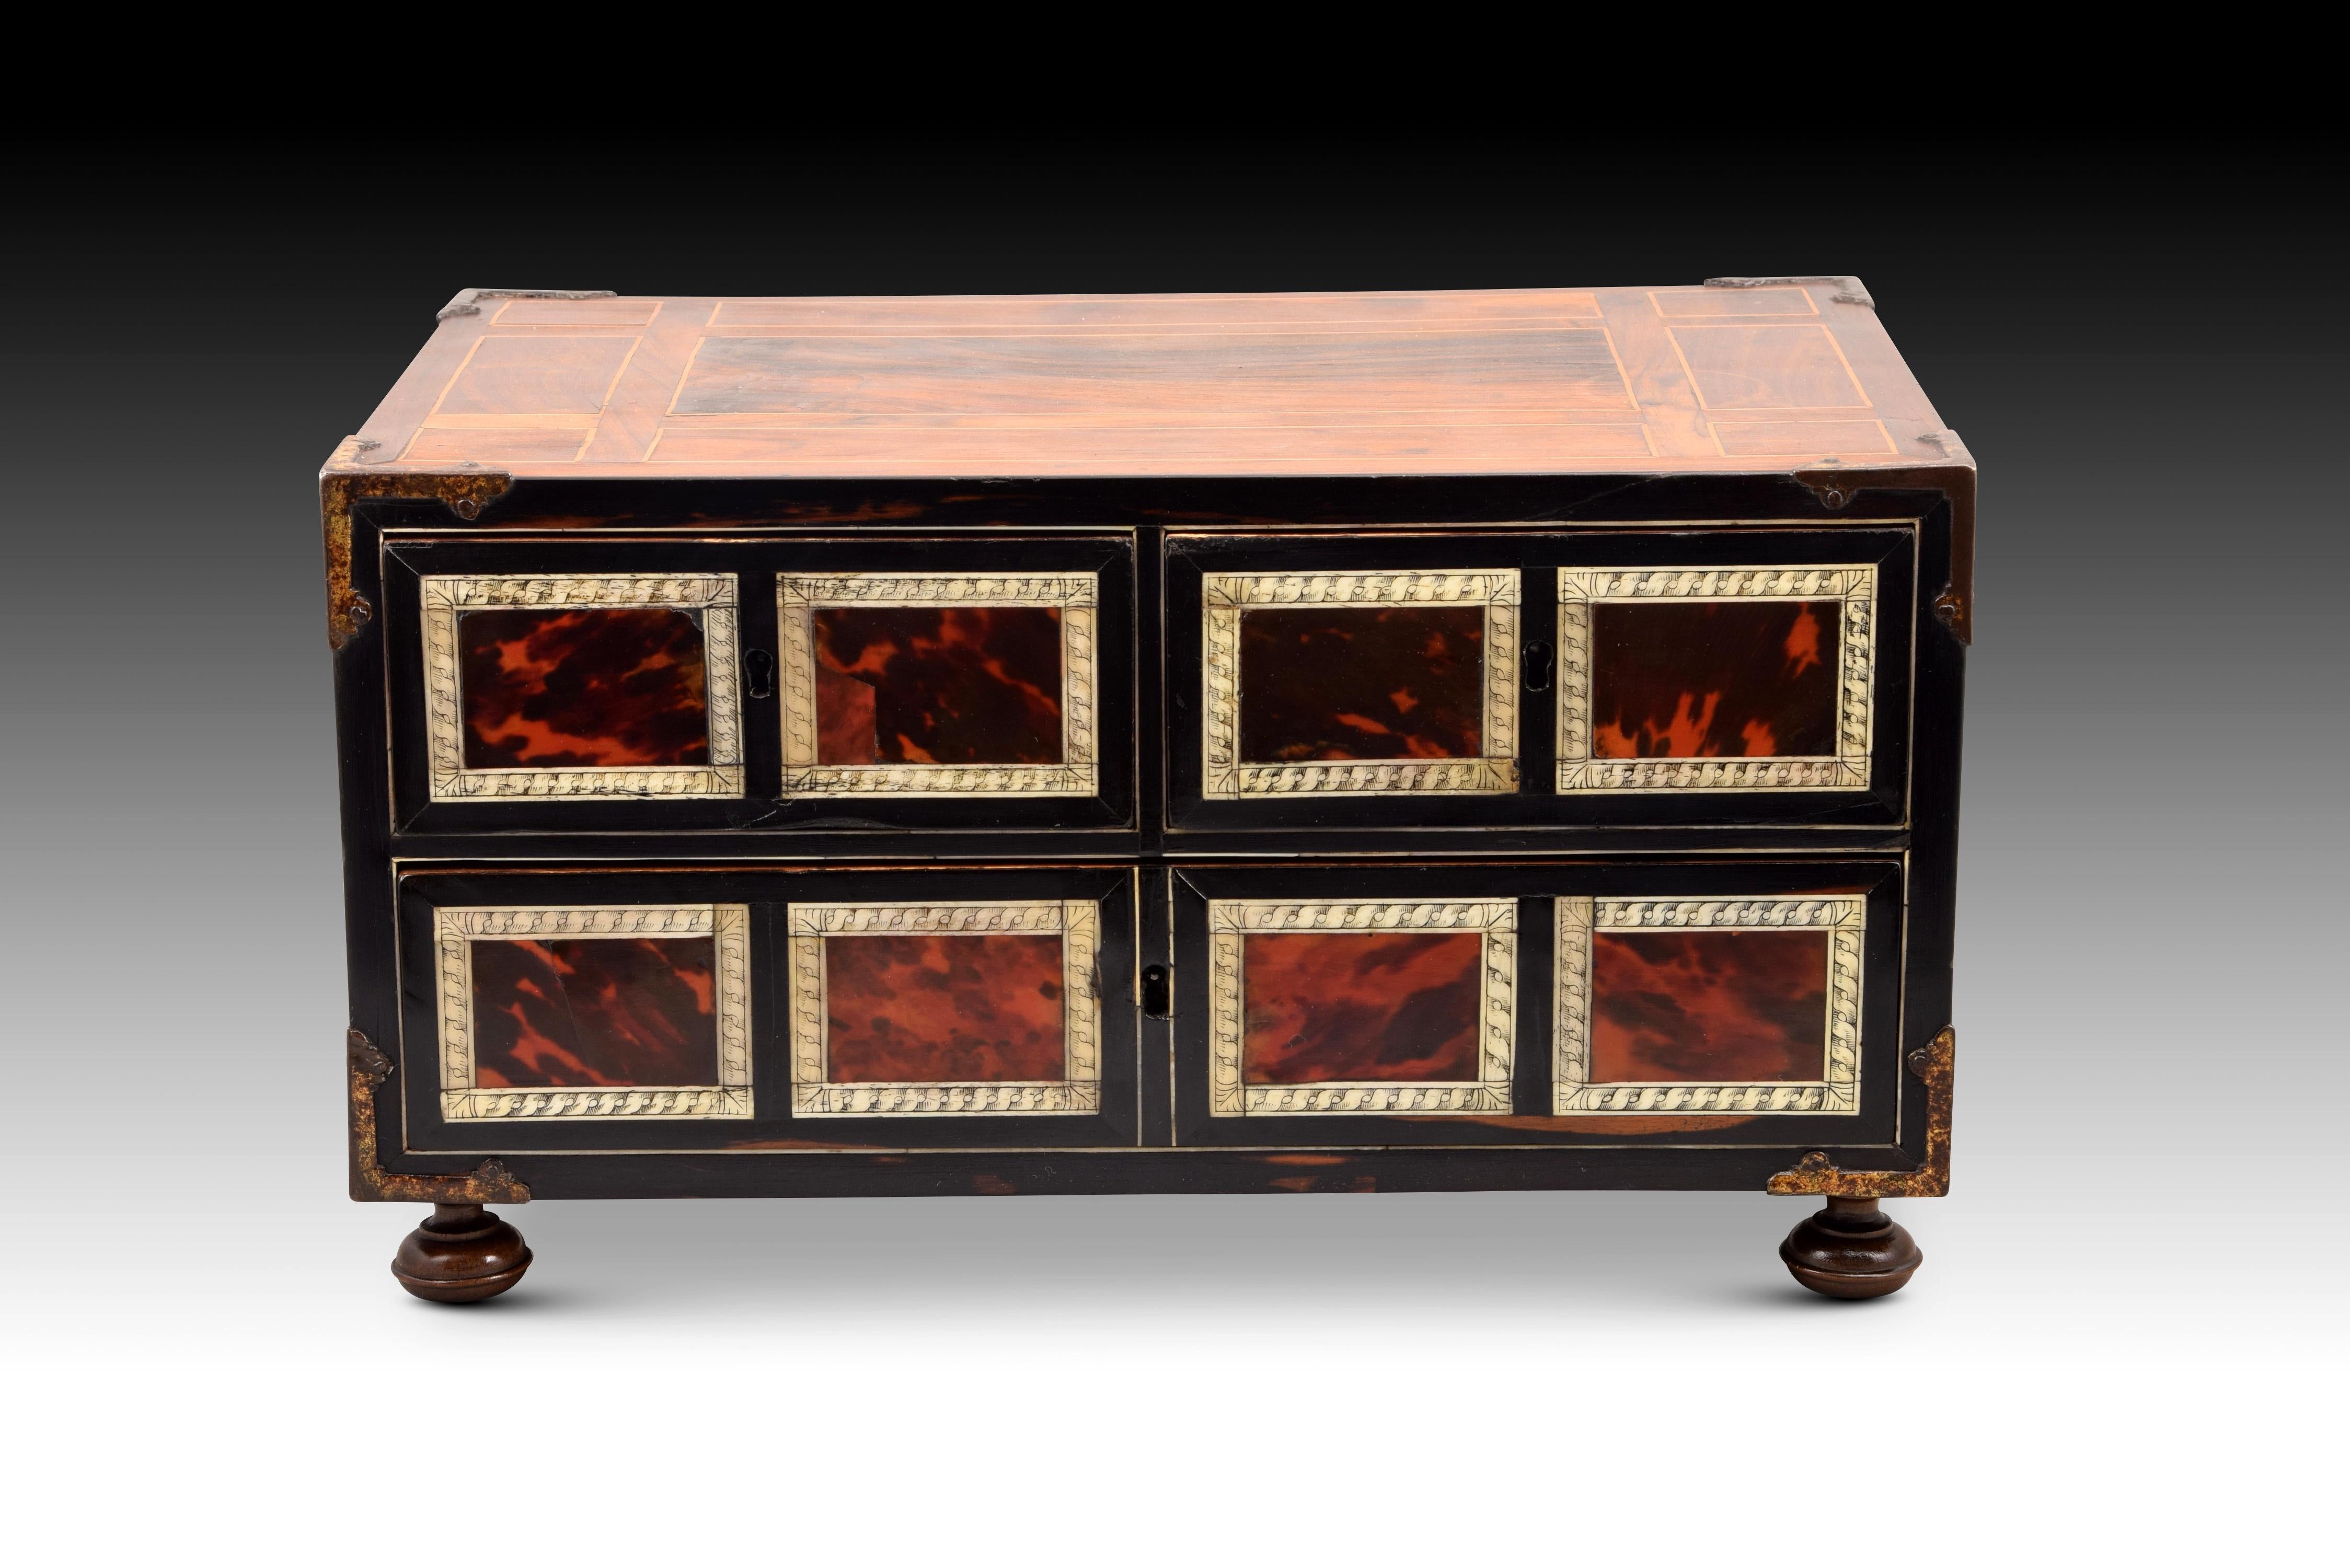 Bargueño or litter bin in Italian style. Tortoiseshell, bone, wood. XVII century. 
Rectangular litter bin of uncovered sample slightly raised on circular legs, decorated with marquetry of simple geometric motifs on the top and the two sides (where,